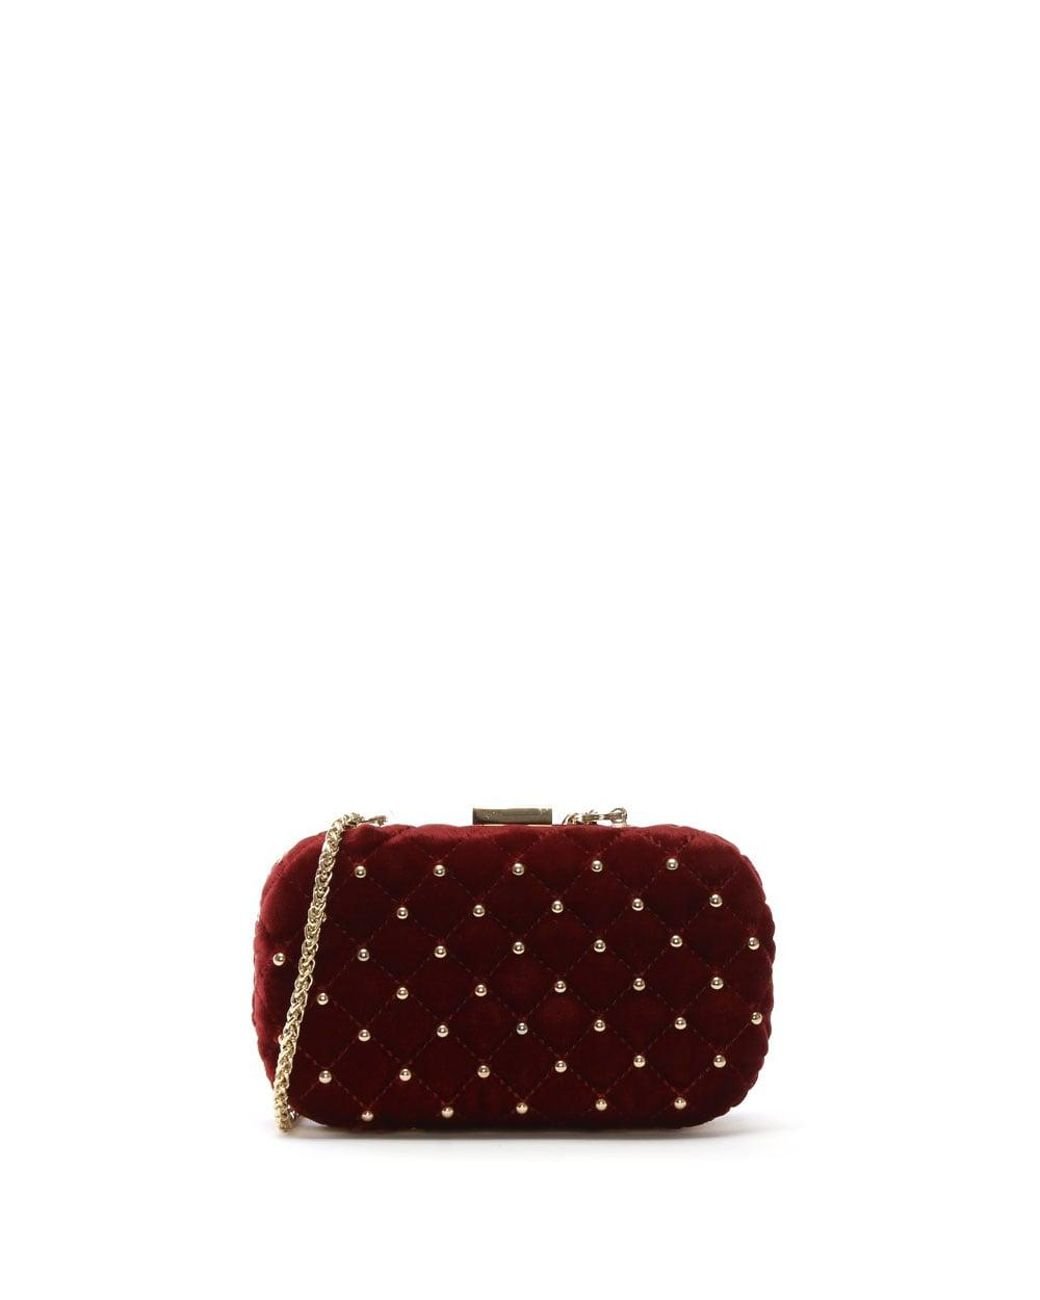 Maroon Velvet Embroidered Bags and Clutches HBDACS359